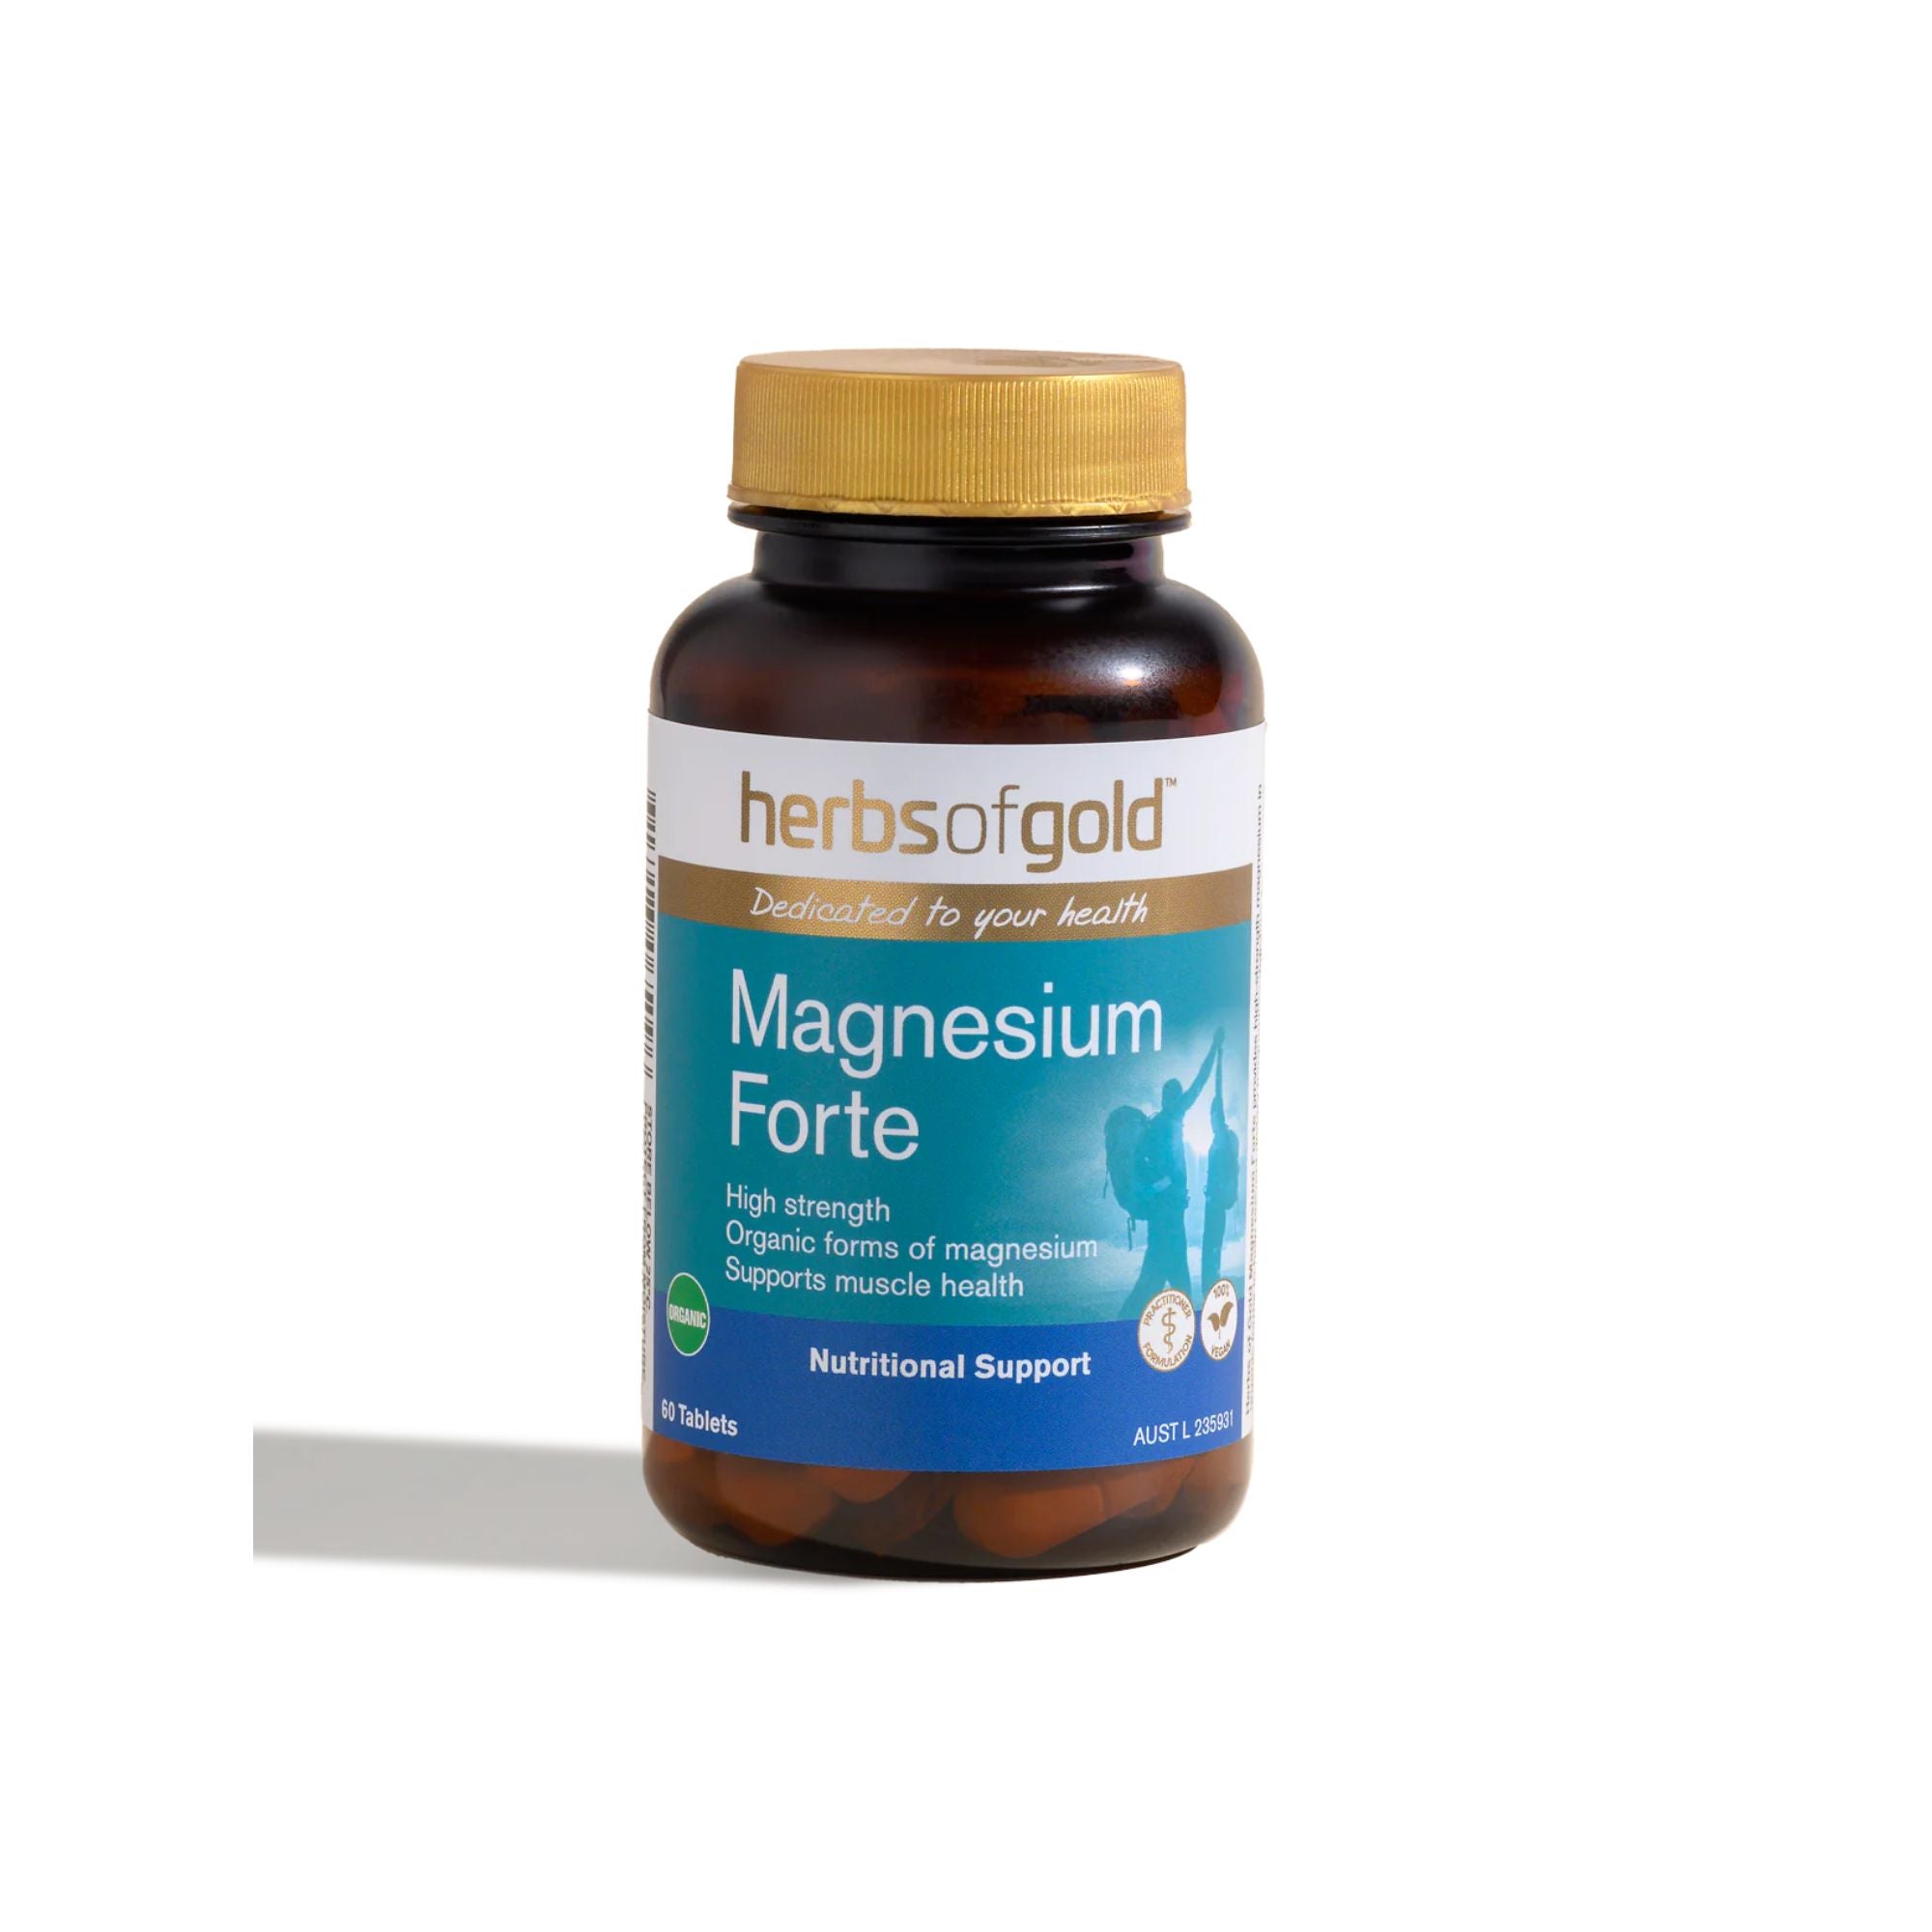 Herbs of Gold Magnesium Forte Vitamins and Health